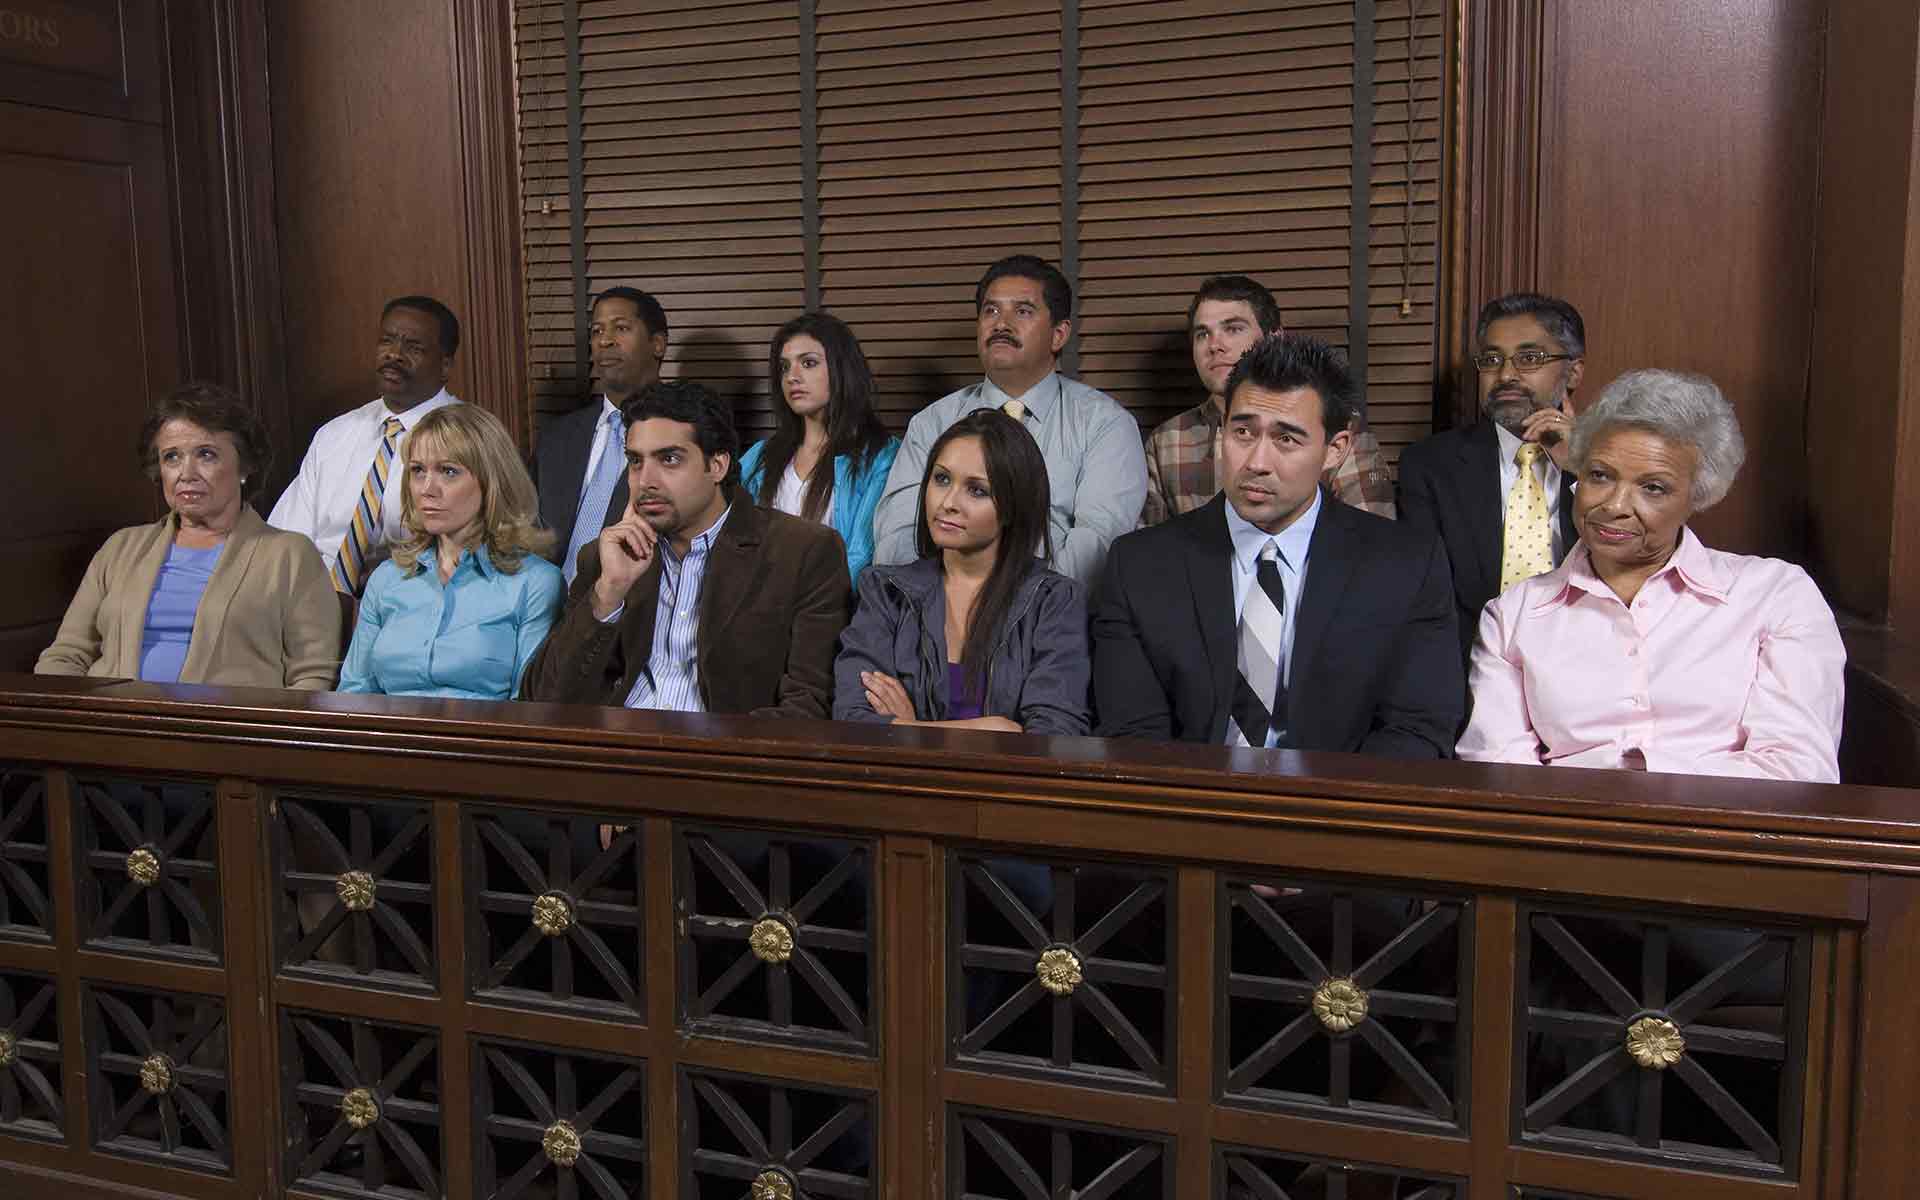 jurors listening to the unfolding case in traditional courtroom setting